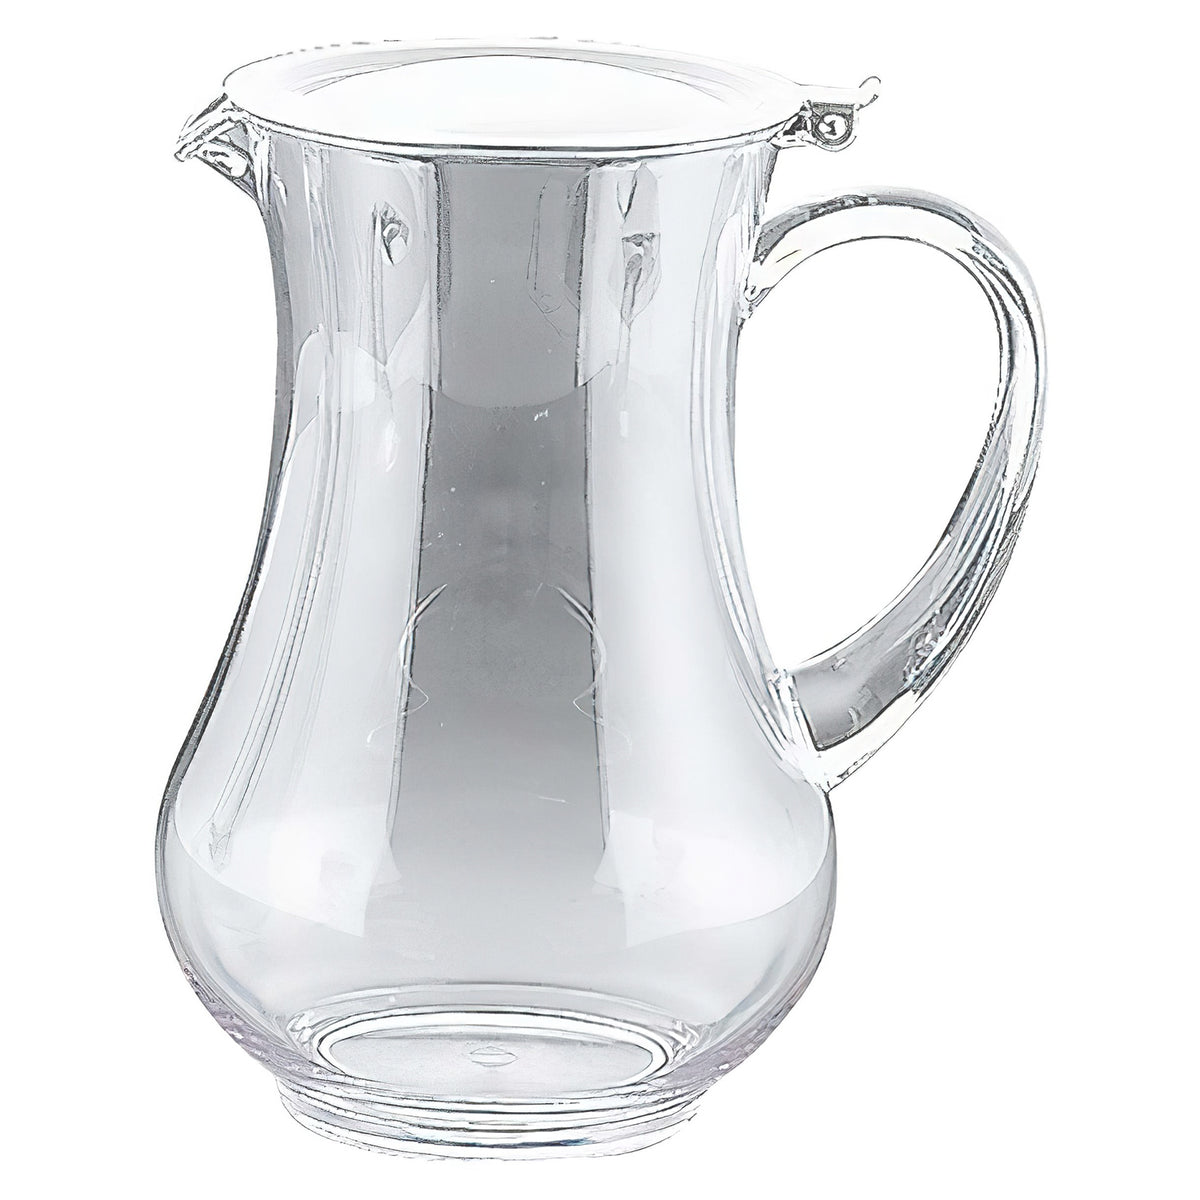 YUKIWA Plastic Water Pitcher with Stainless Steel Lid